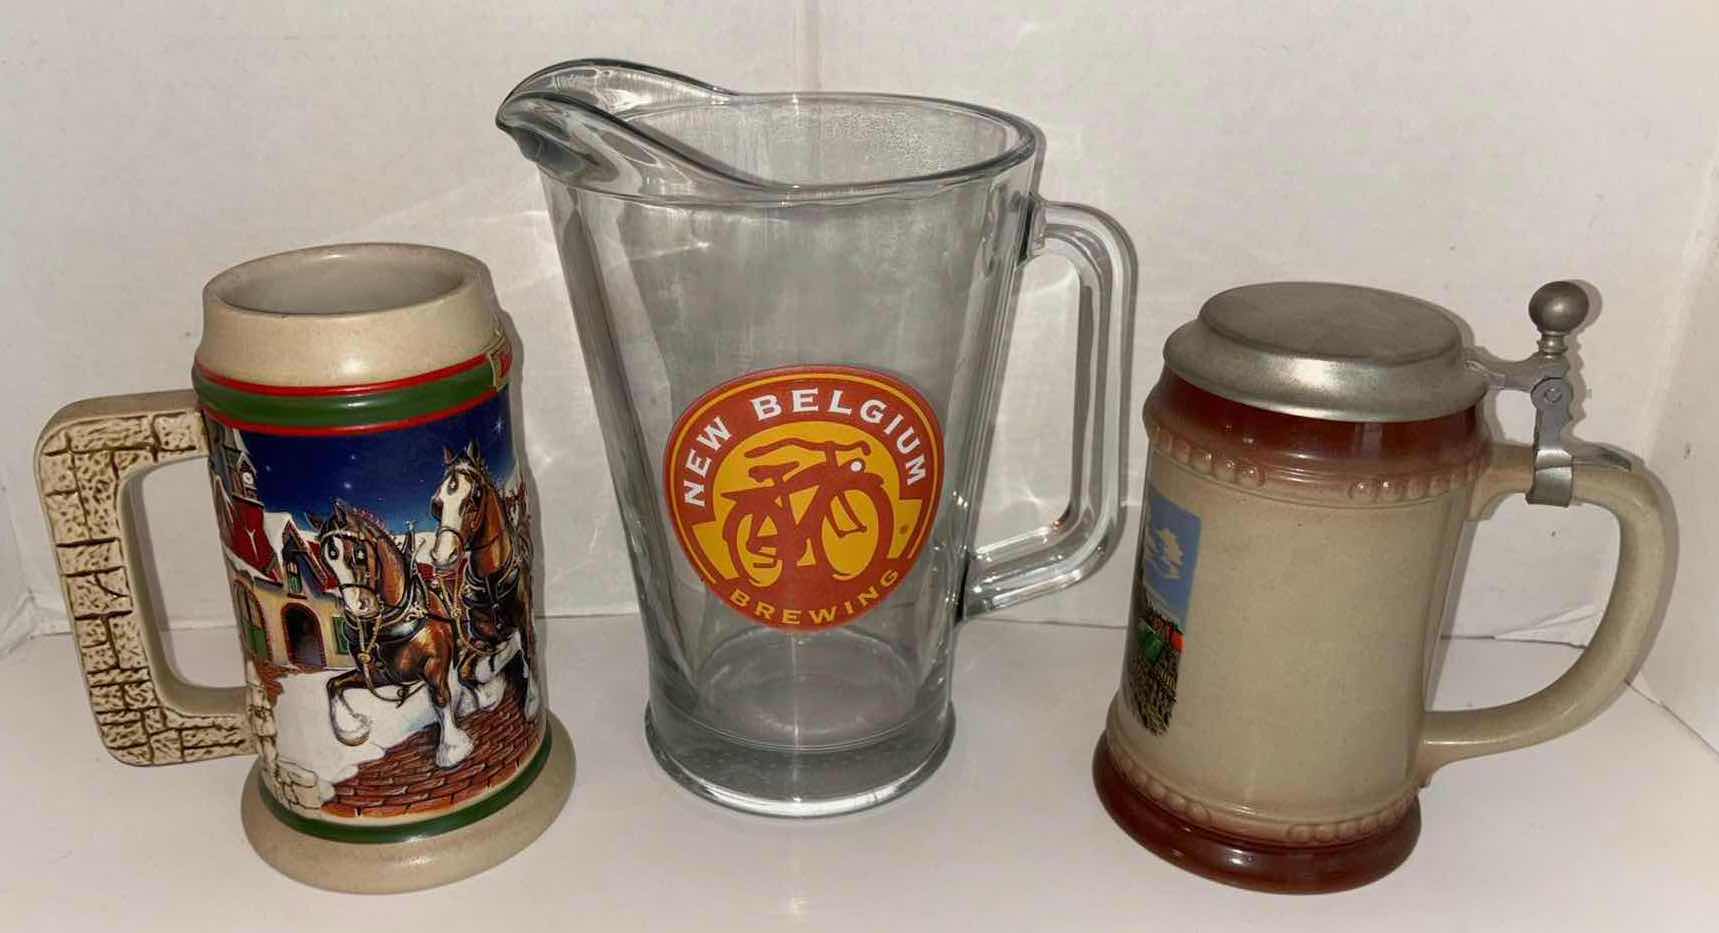 Photo 1 of ANHEUSER-BUSCH GRANTS FARM HOLIDAY1998 HOLIDAY STEIN, LIDDED GERMAN STEIN & NEW BELGIUM BREWING GLASS PITCHER